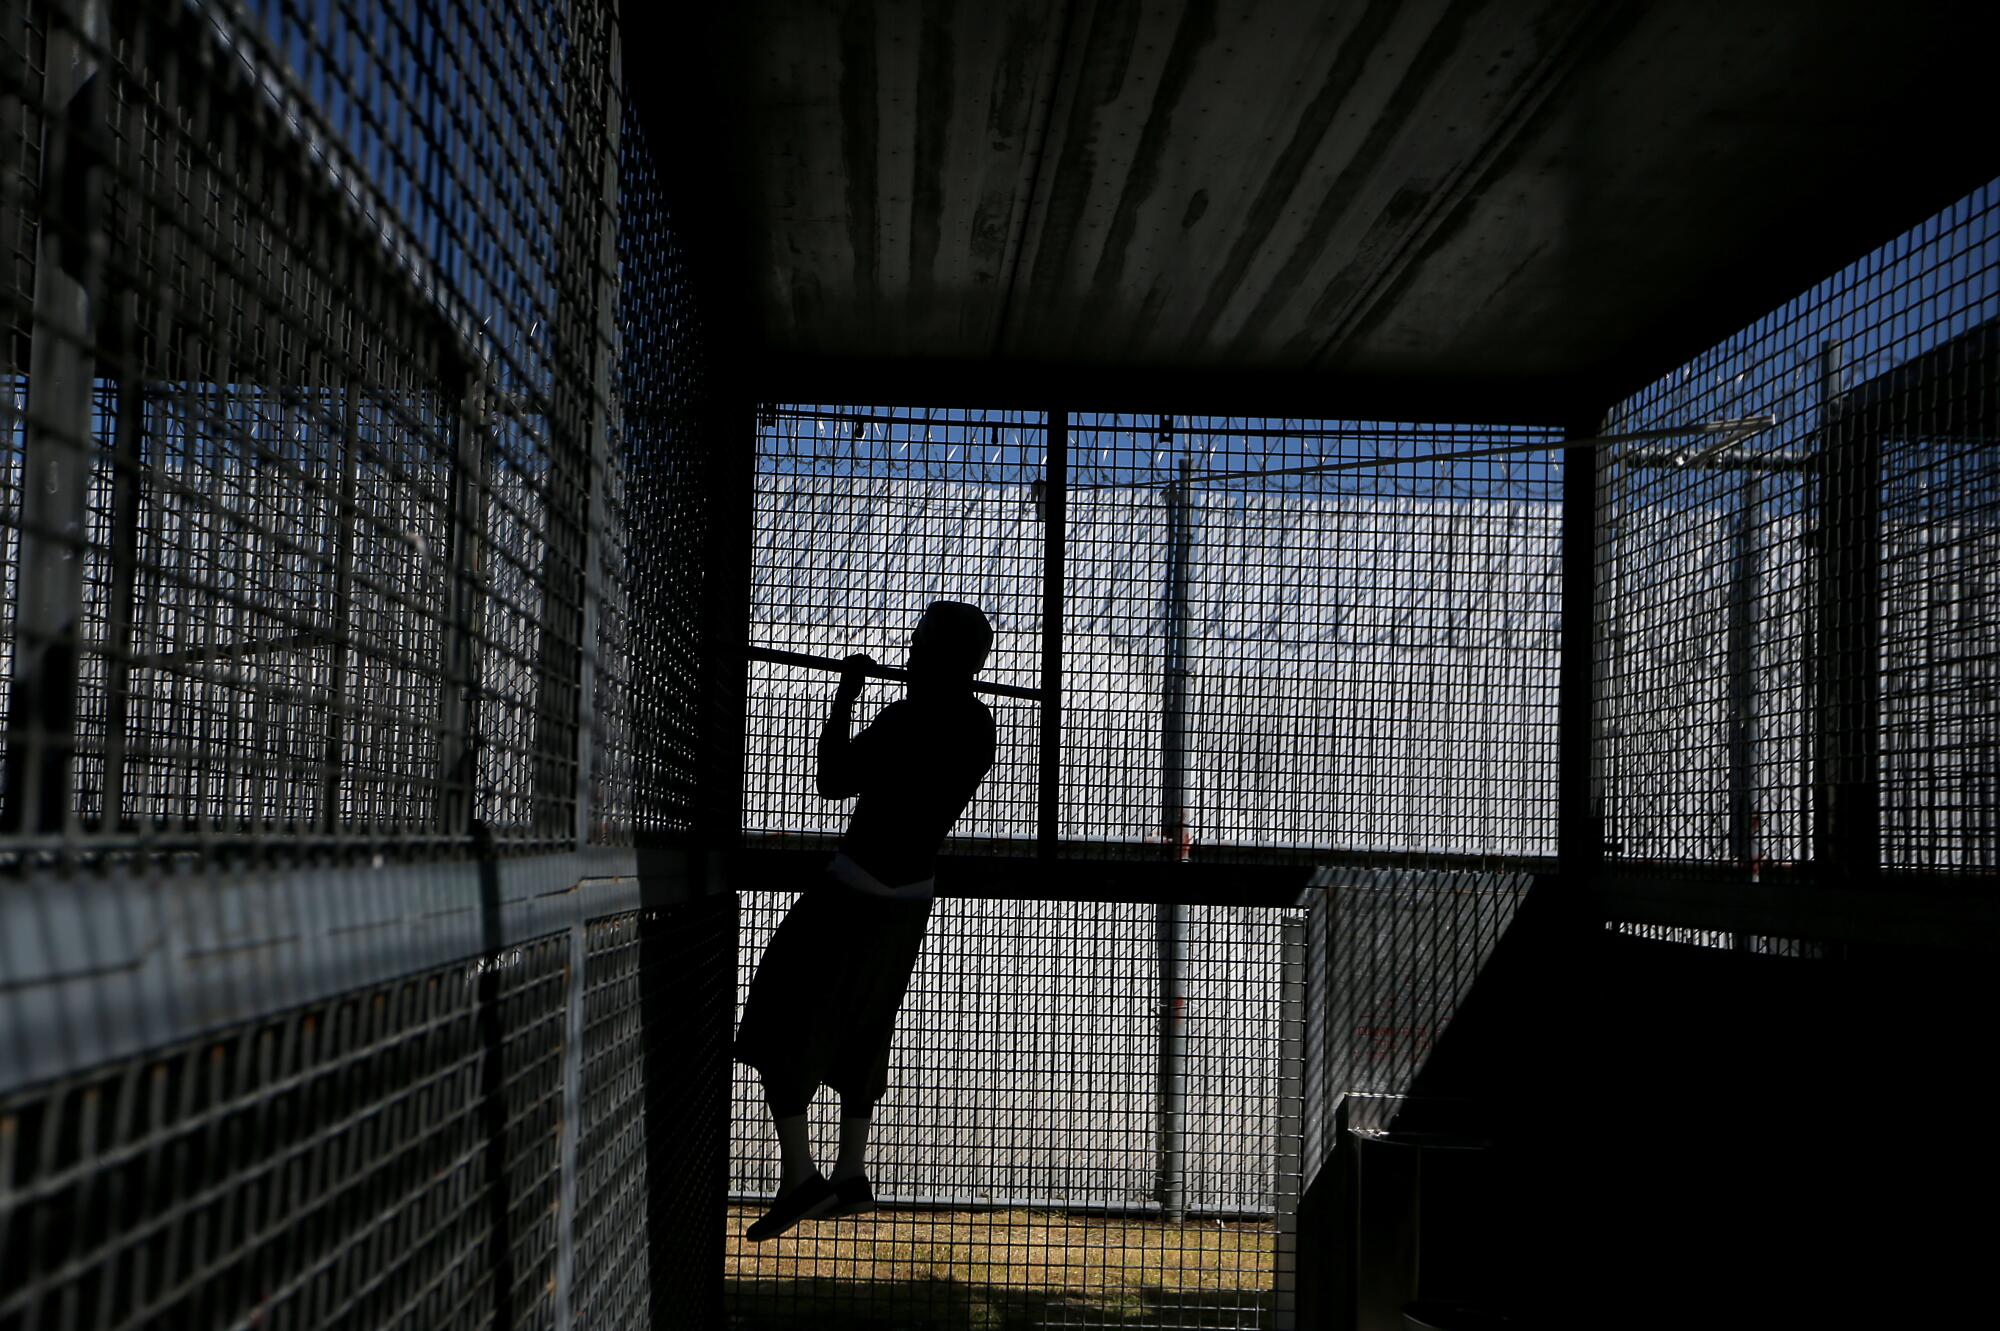 A man is confined in an outdoor cage in the exercise yard of a California State Prison.